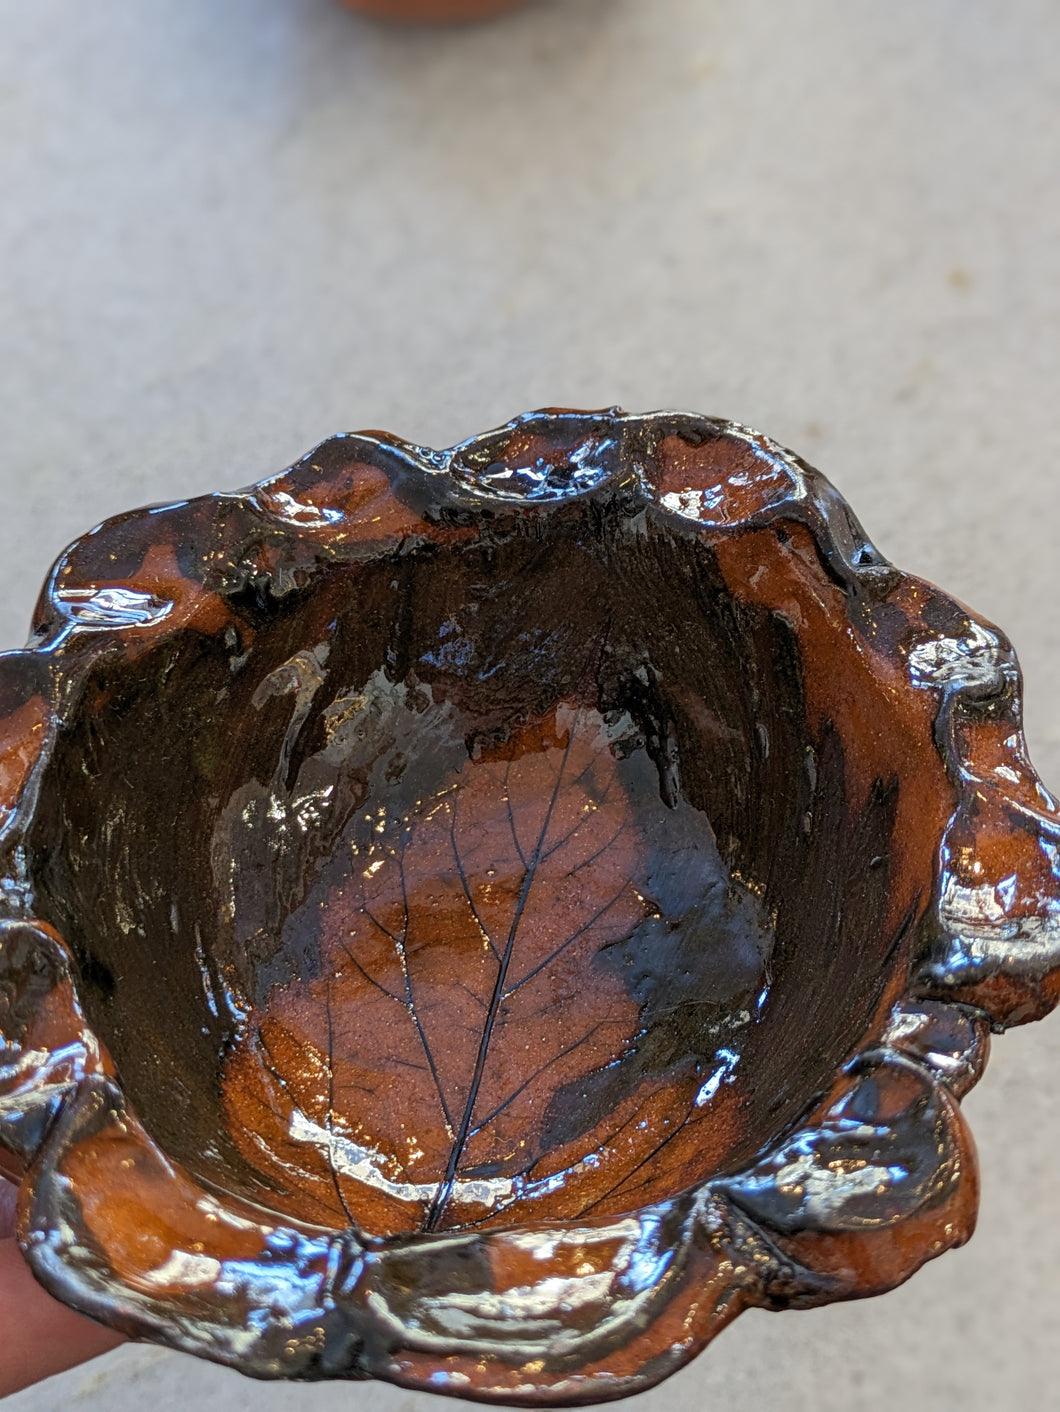 Mulberry & Hackberry Leaf Small Bowls by Jennica Kruse